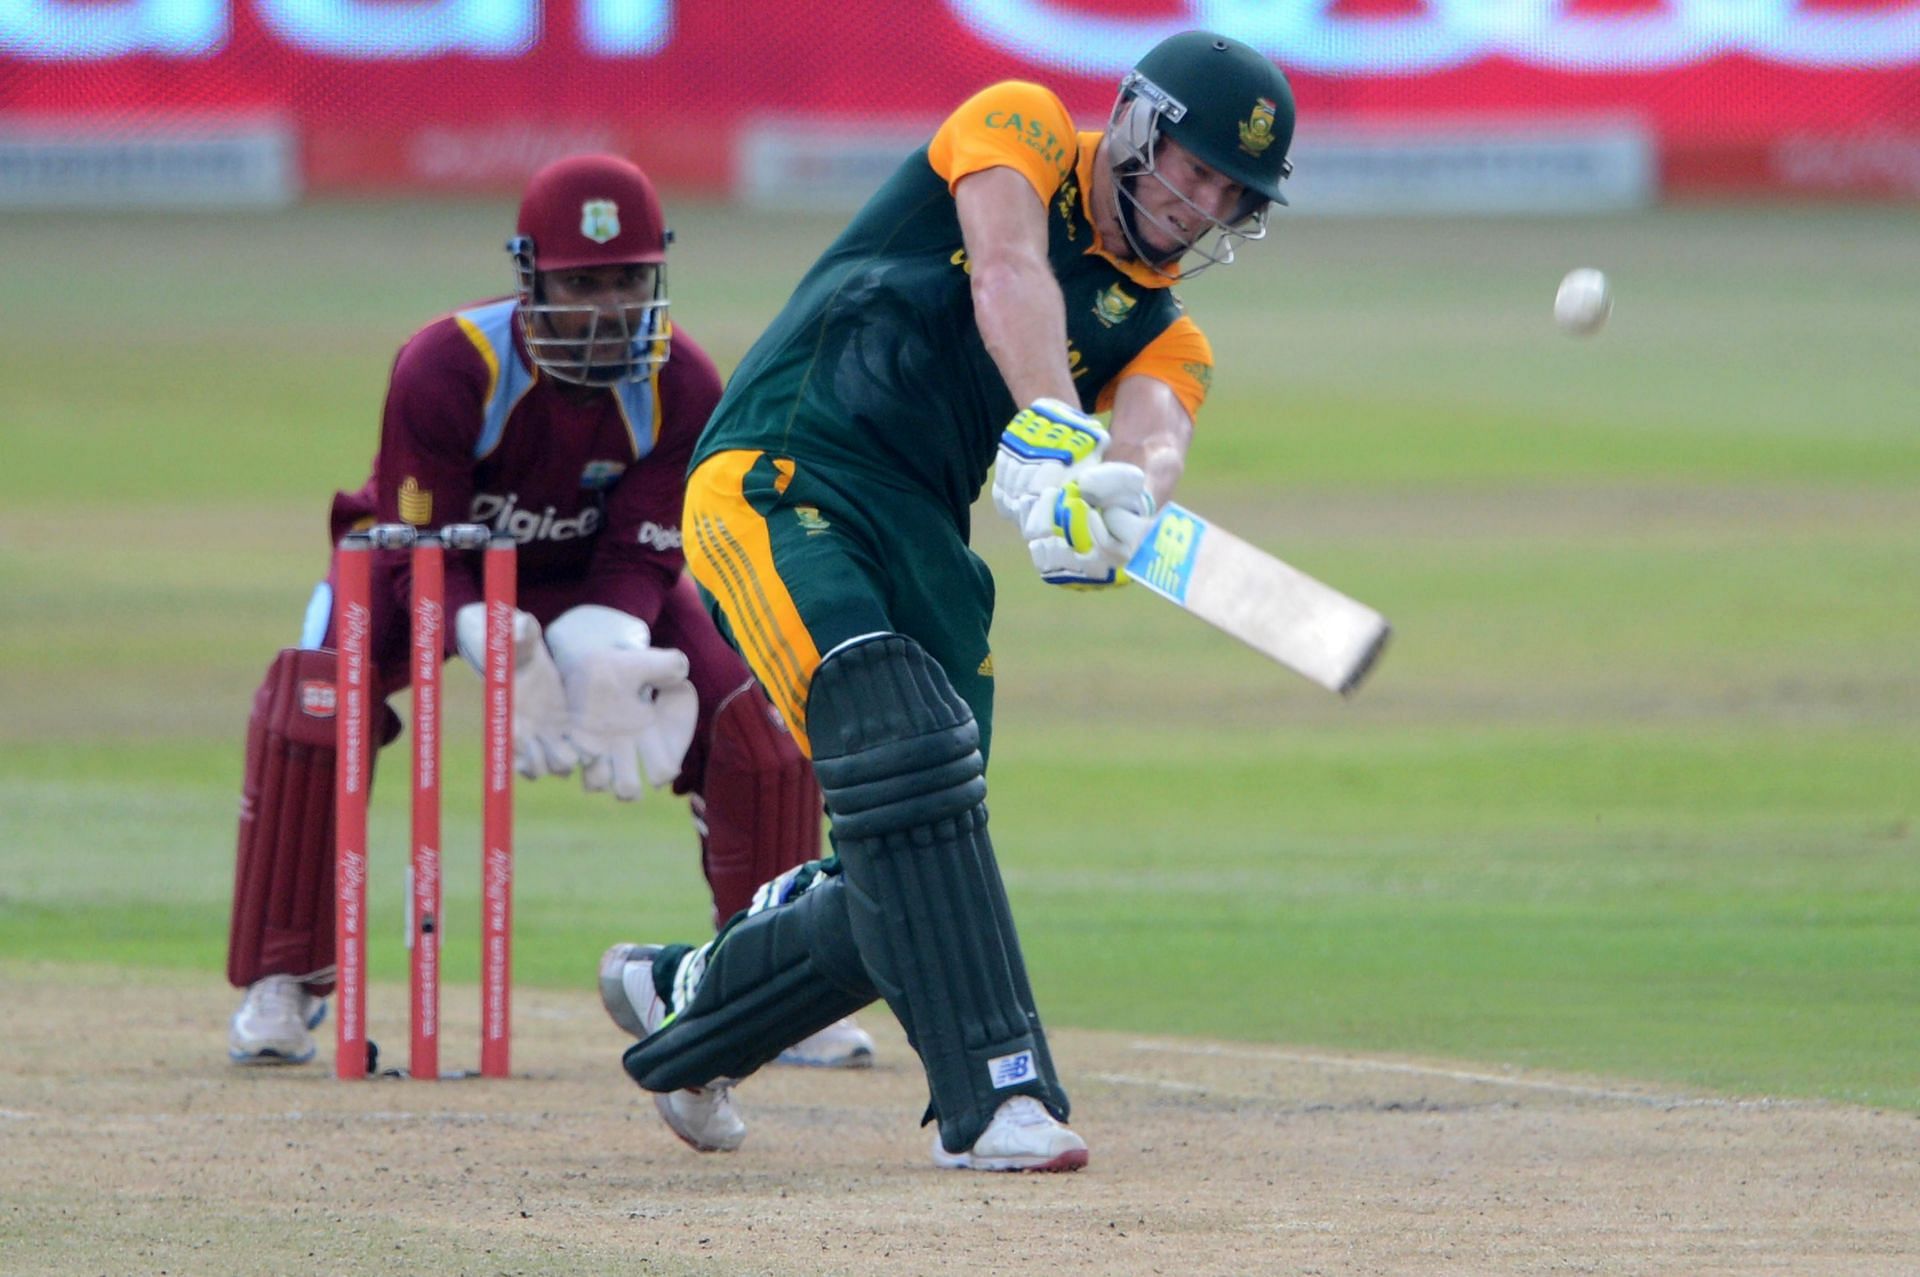 South Africa v West Indies - One Day International Series